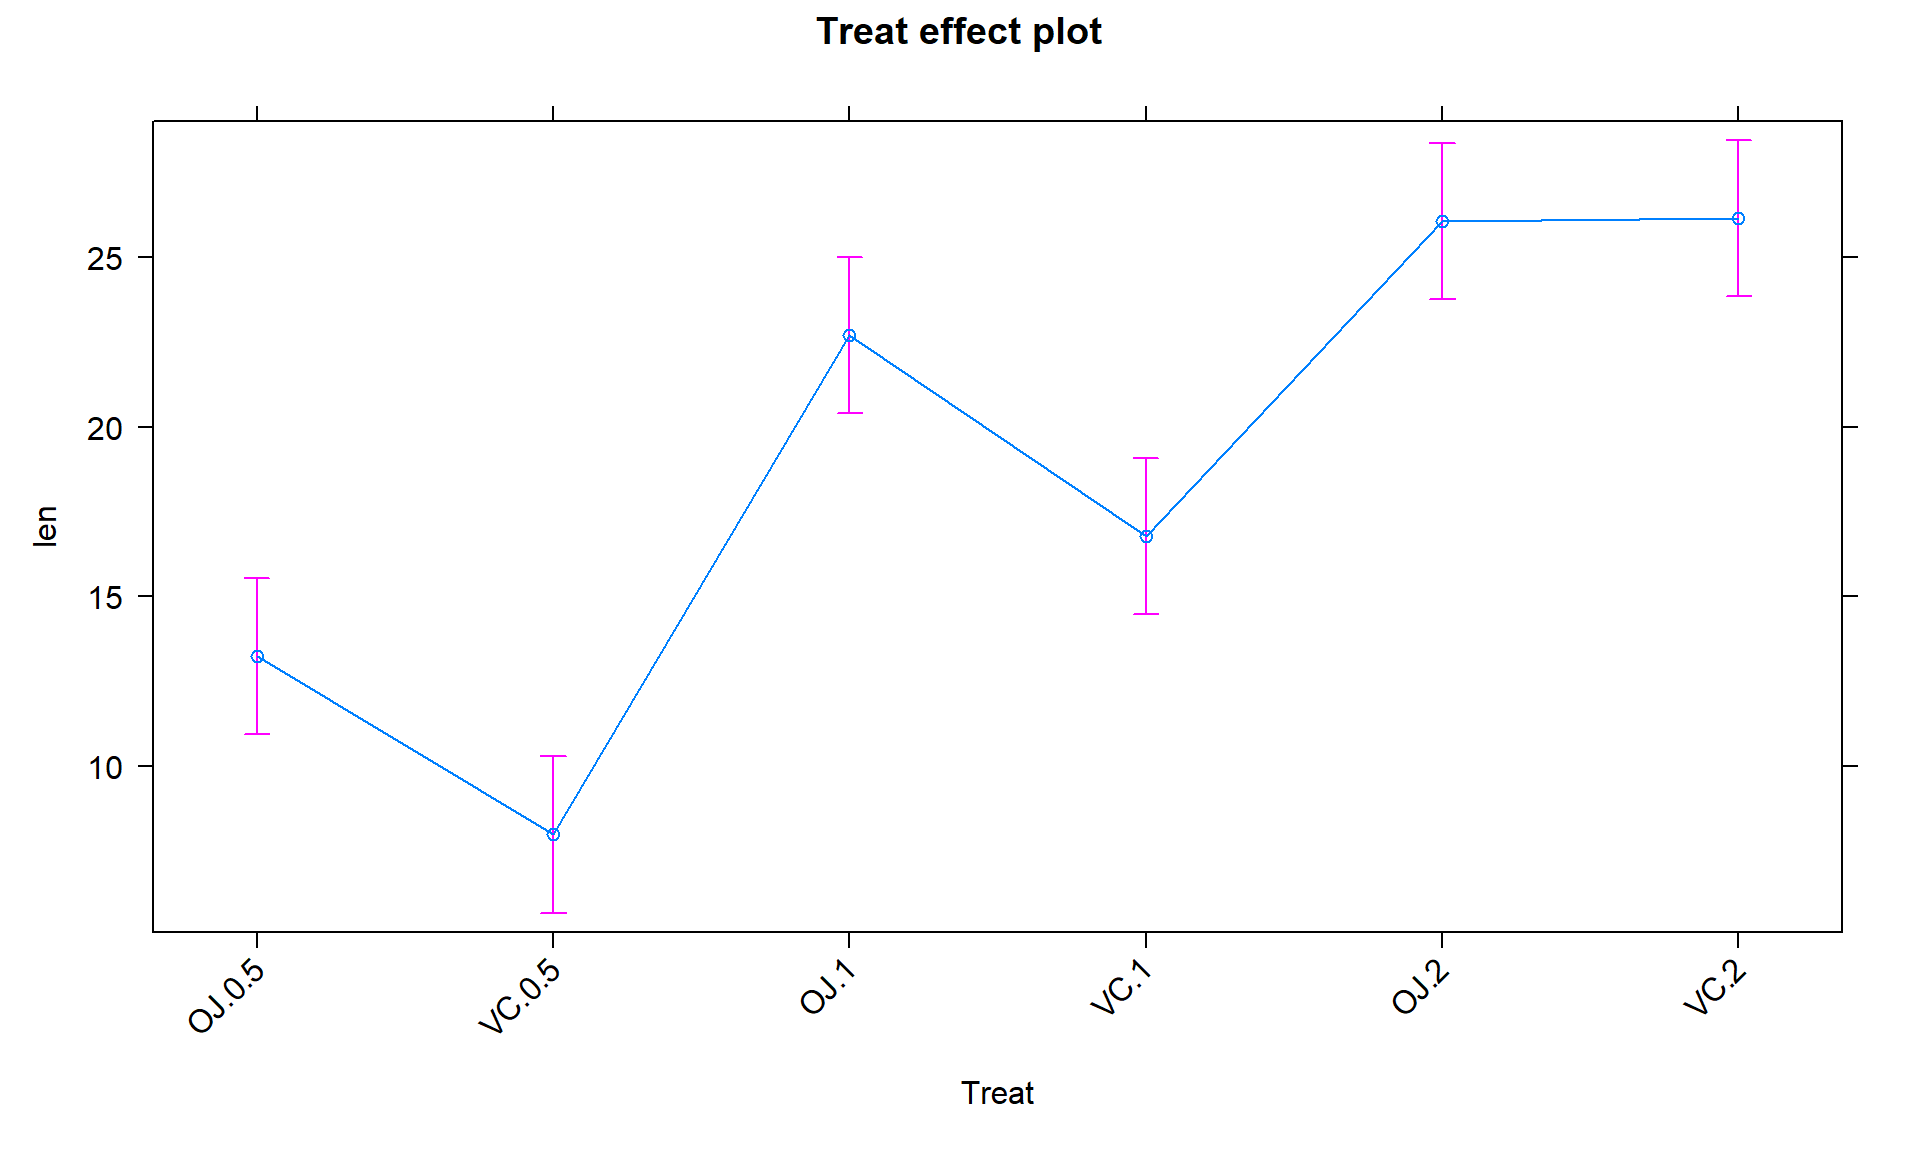 Effect plot of the One-Way ANOVA model for the odontoblast growth data, with rotated x-axis text for enhanced readability of the levels of the predictor variable.